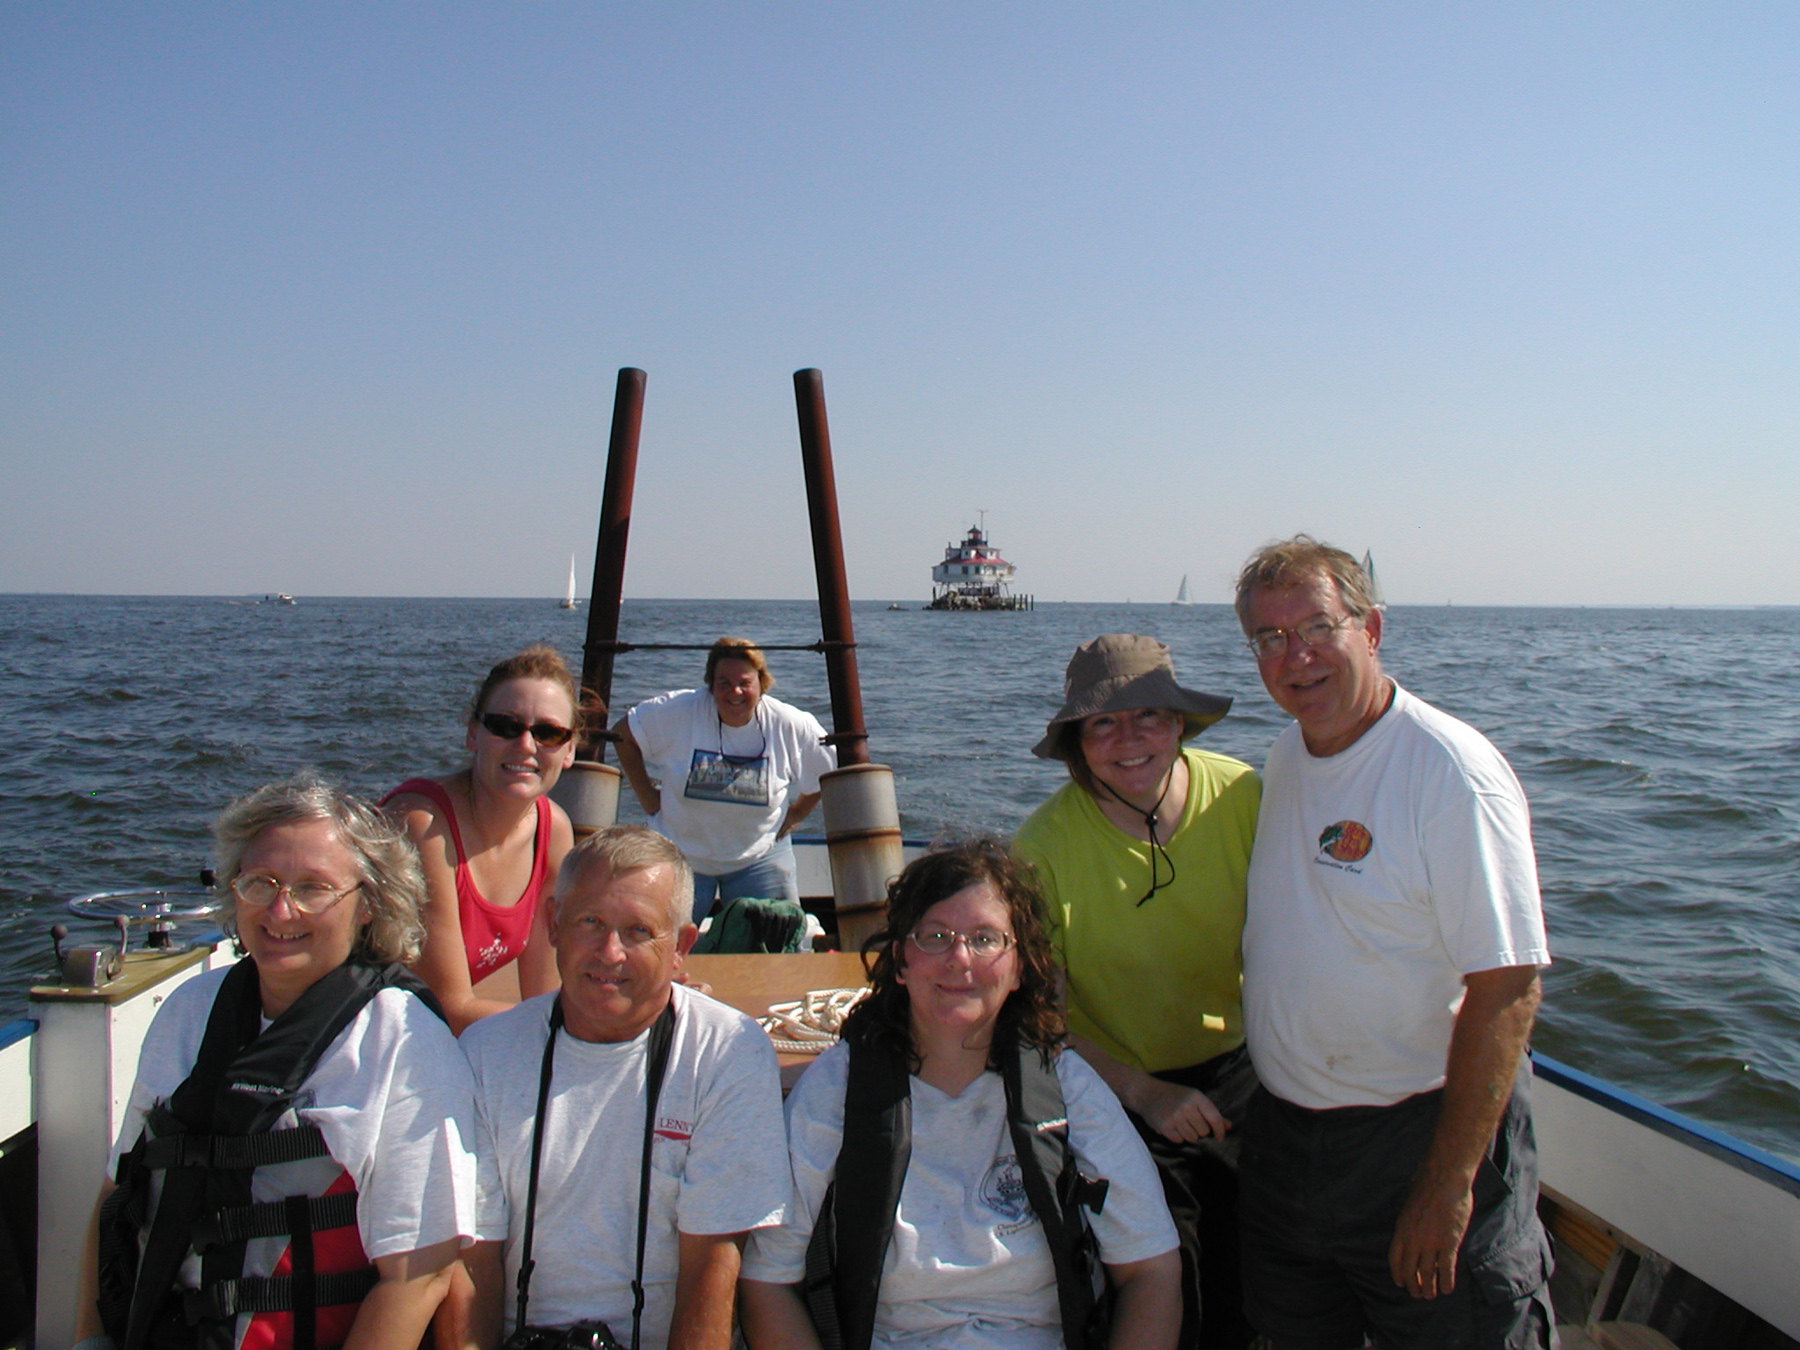 Volunteers returning to shore after a day's work at Thomas Point Shoal Lighthouse. (Photo credit: H. Gonzalez and USLHS.)